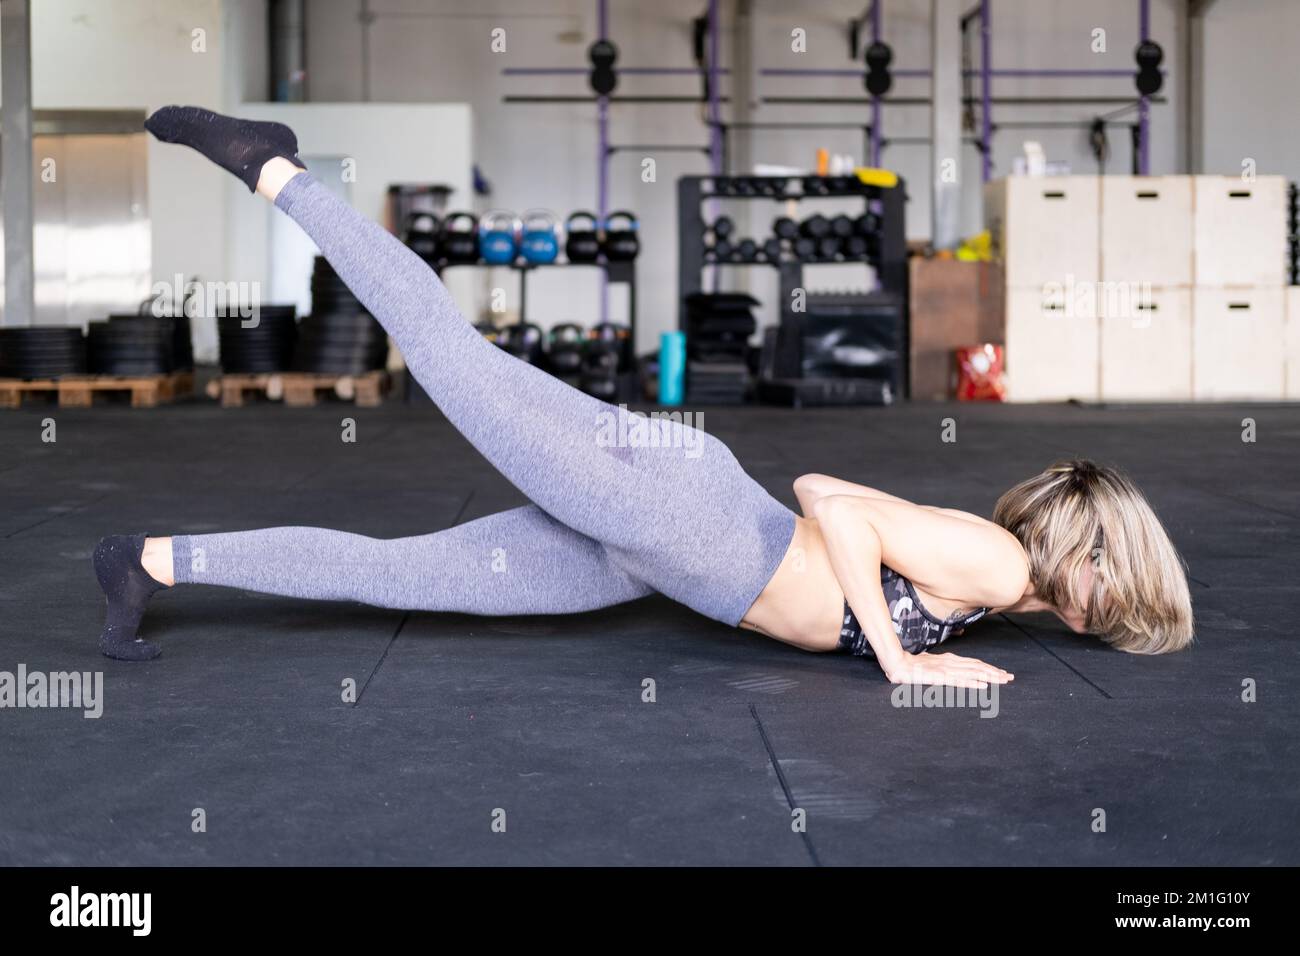 An unrecognizable blond mid adult woman practicing vinyasa flow yoga with her right leg up and wearing leggings and a sports bra in a gym. Stock Photo